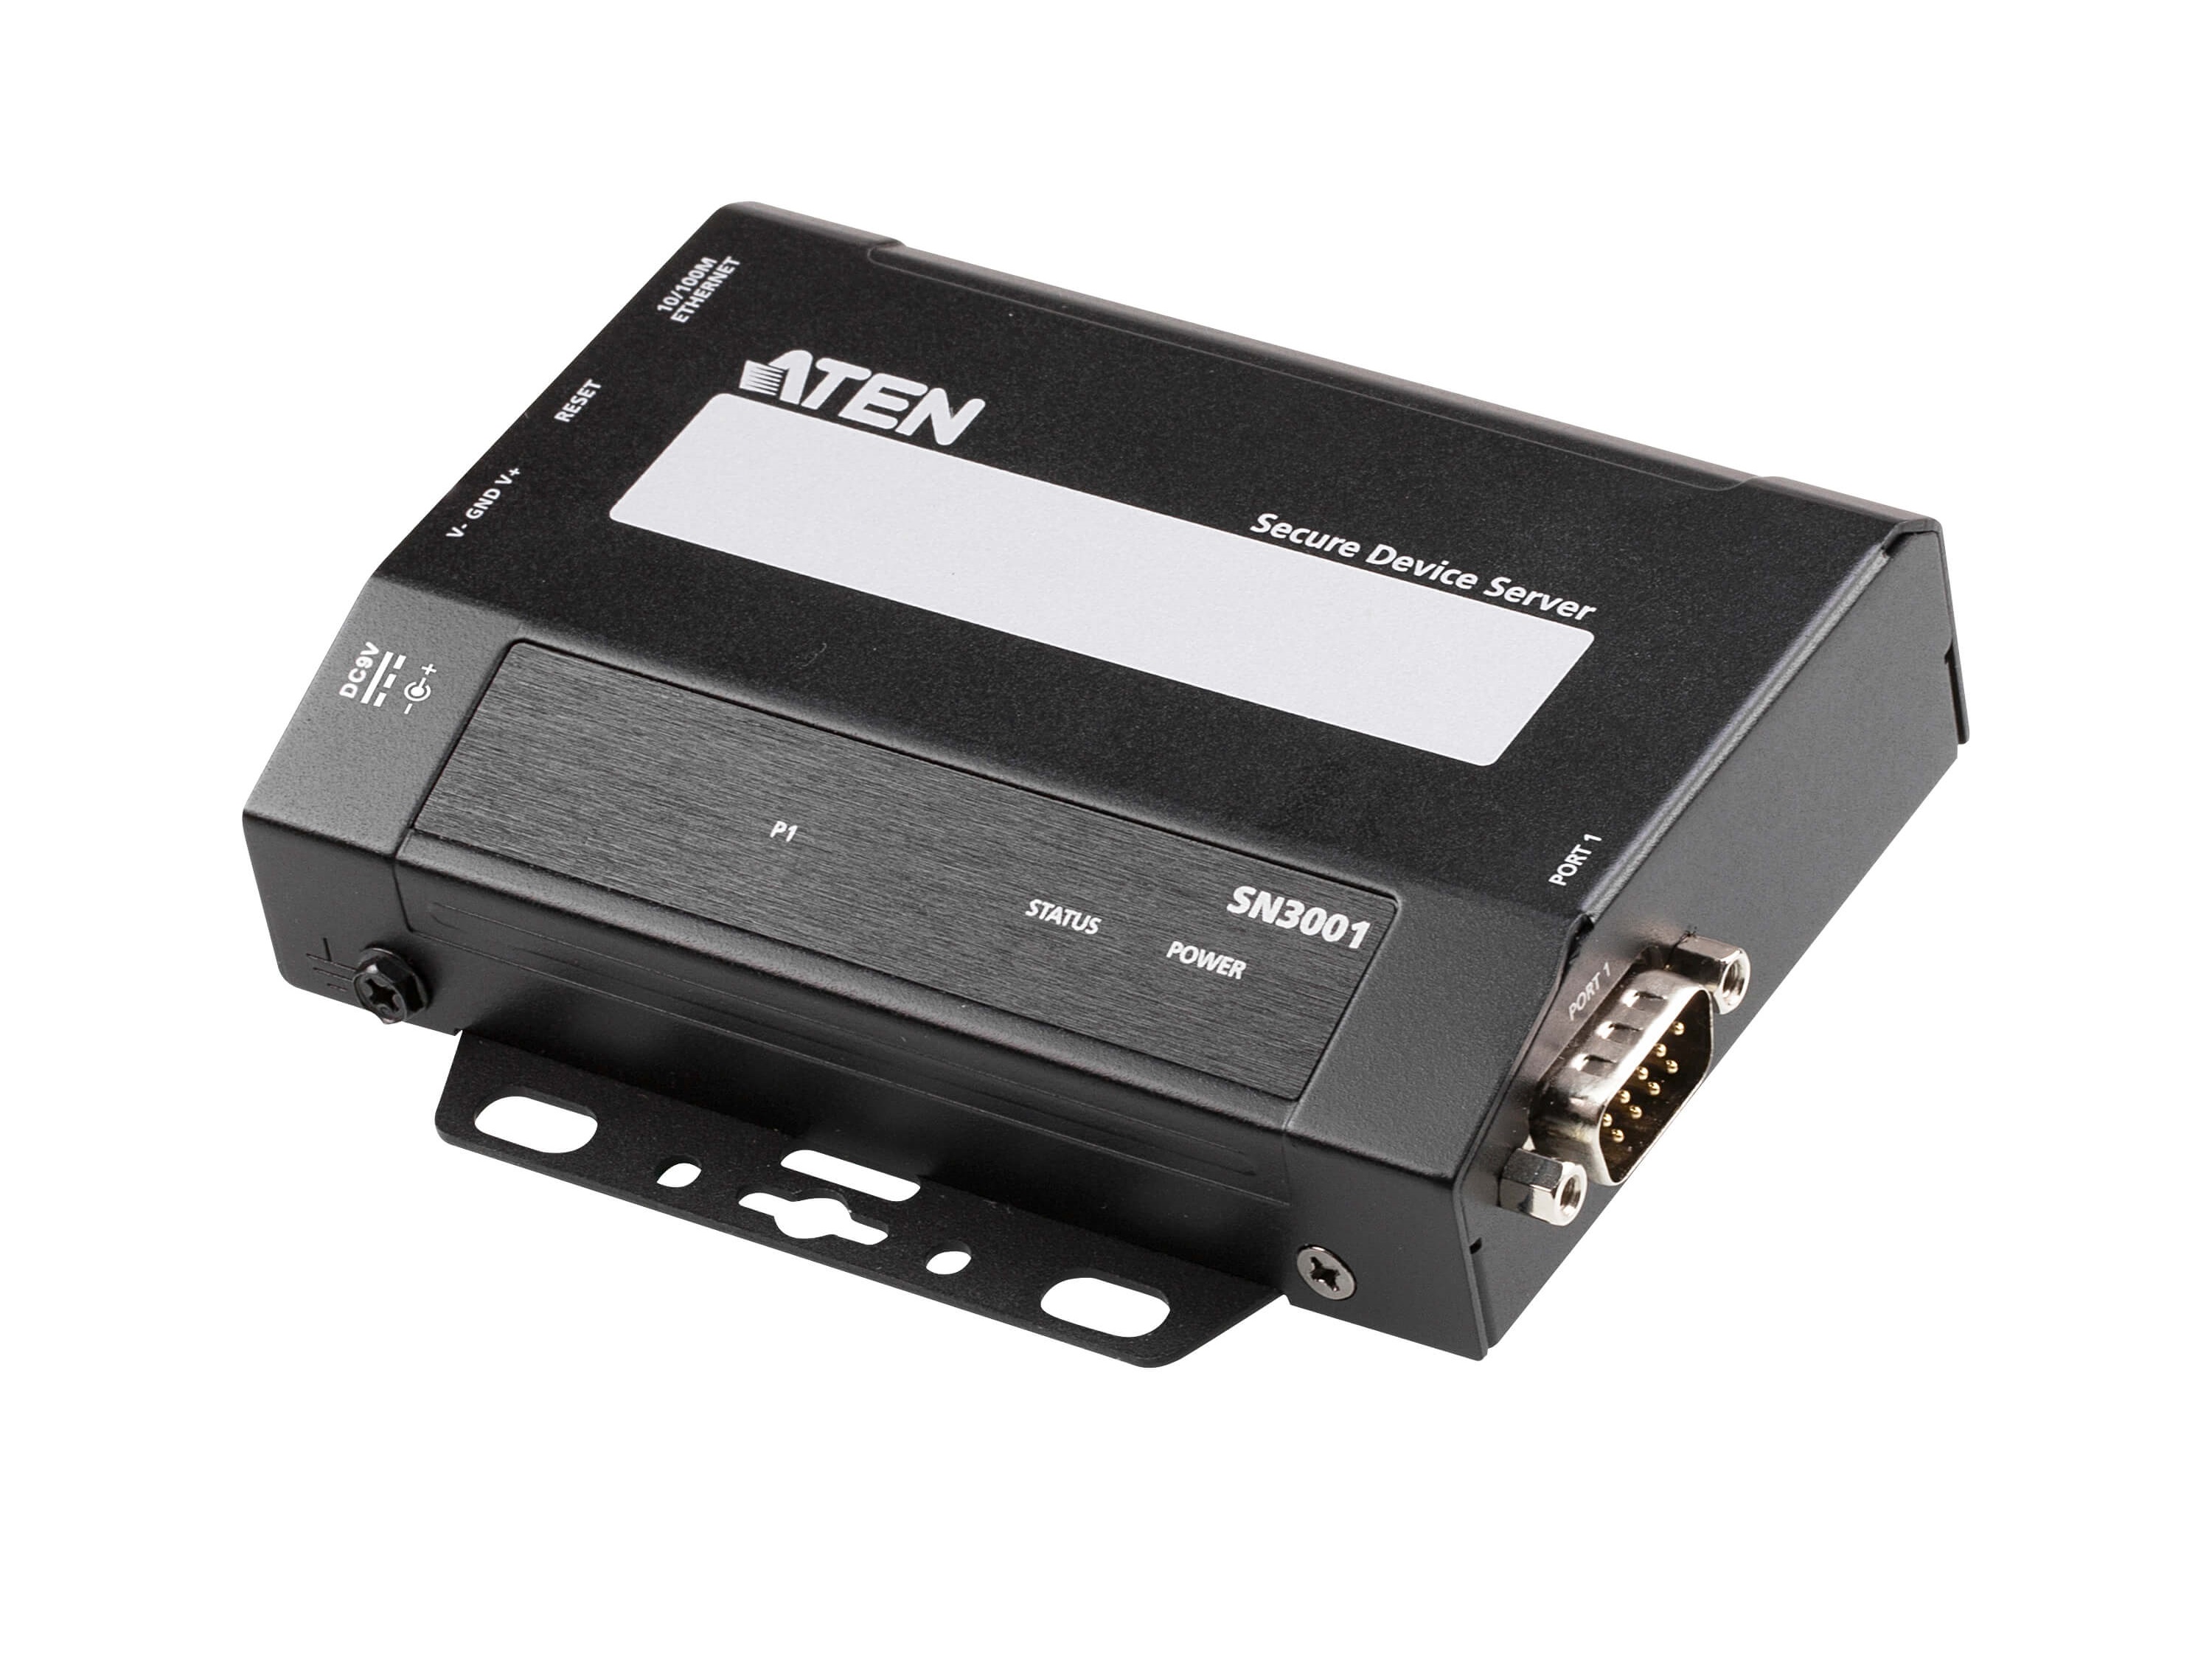 SN3001 1-Port RS-232 Secure Device Server by Aten